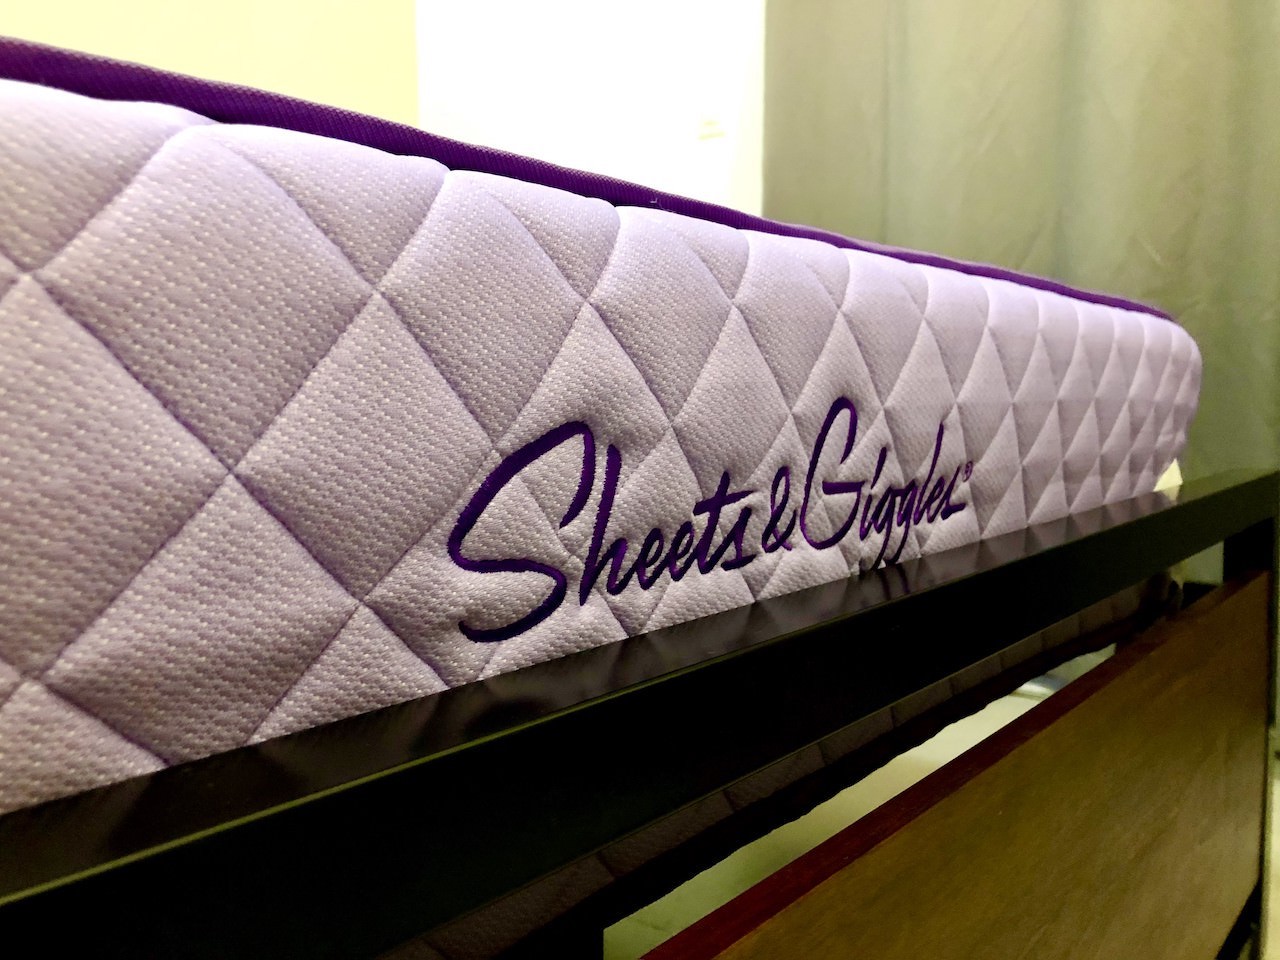 Sheets and giggles mattress review